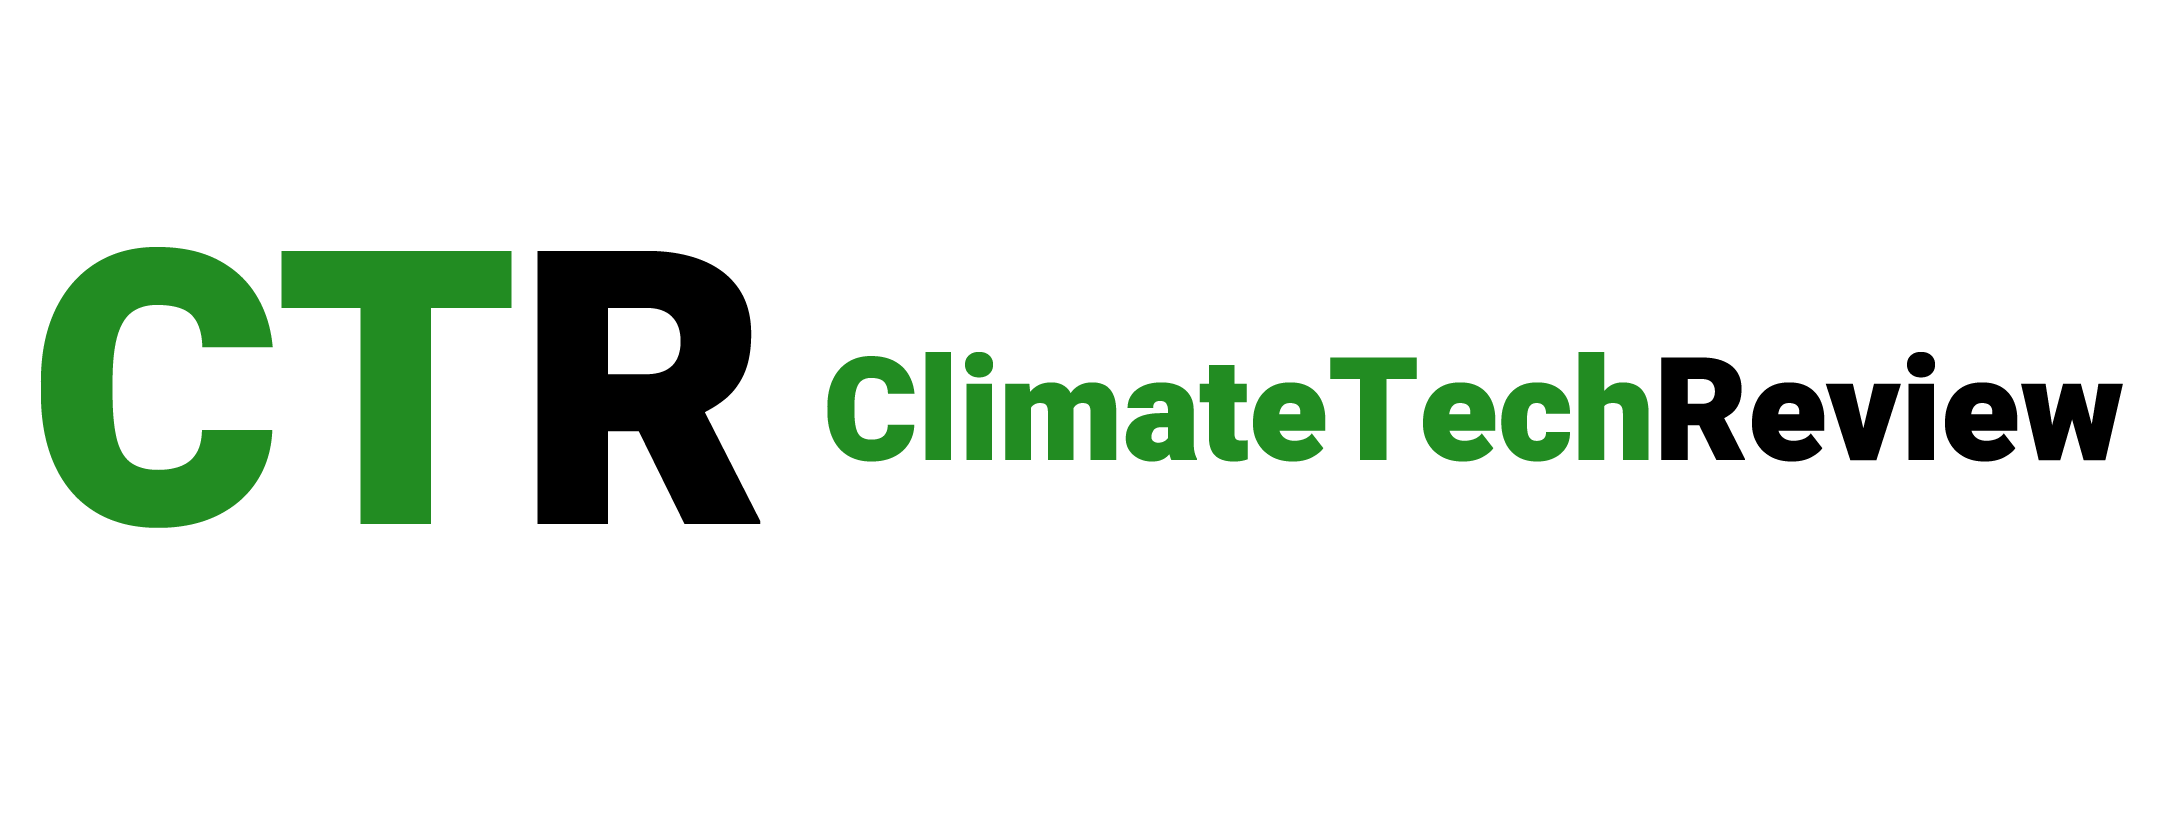 ClimateTechReview